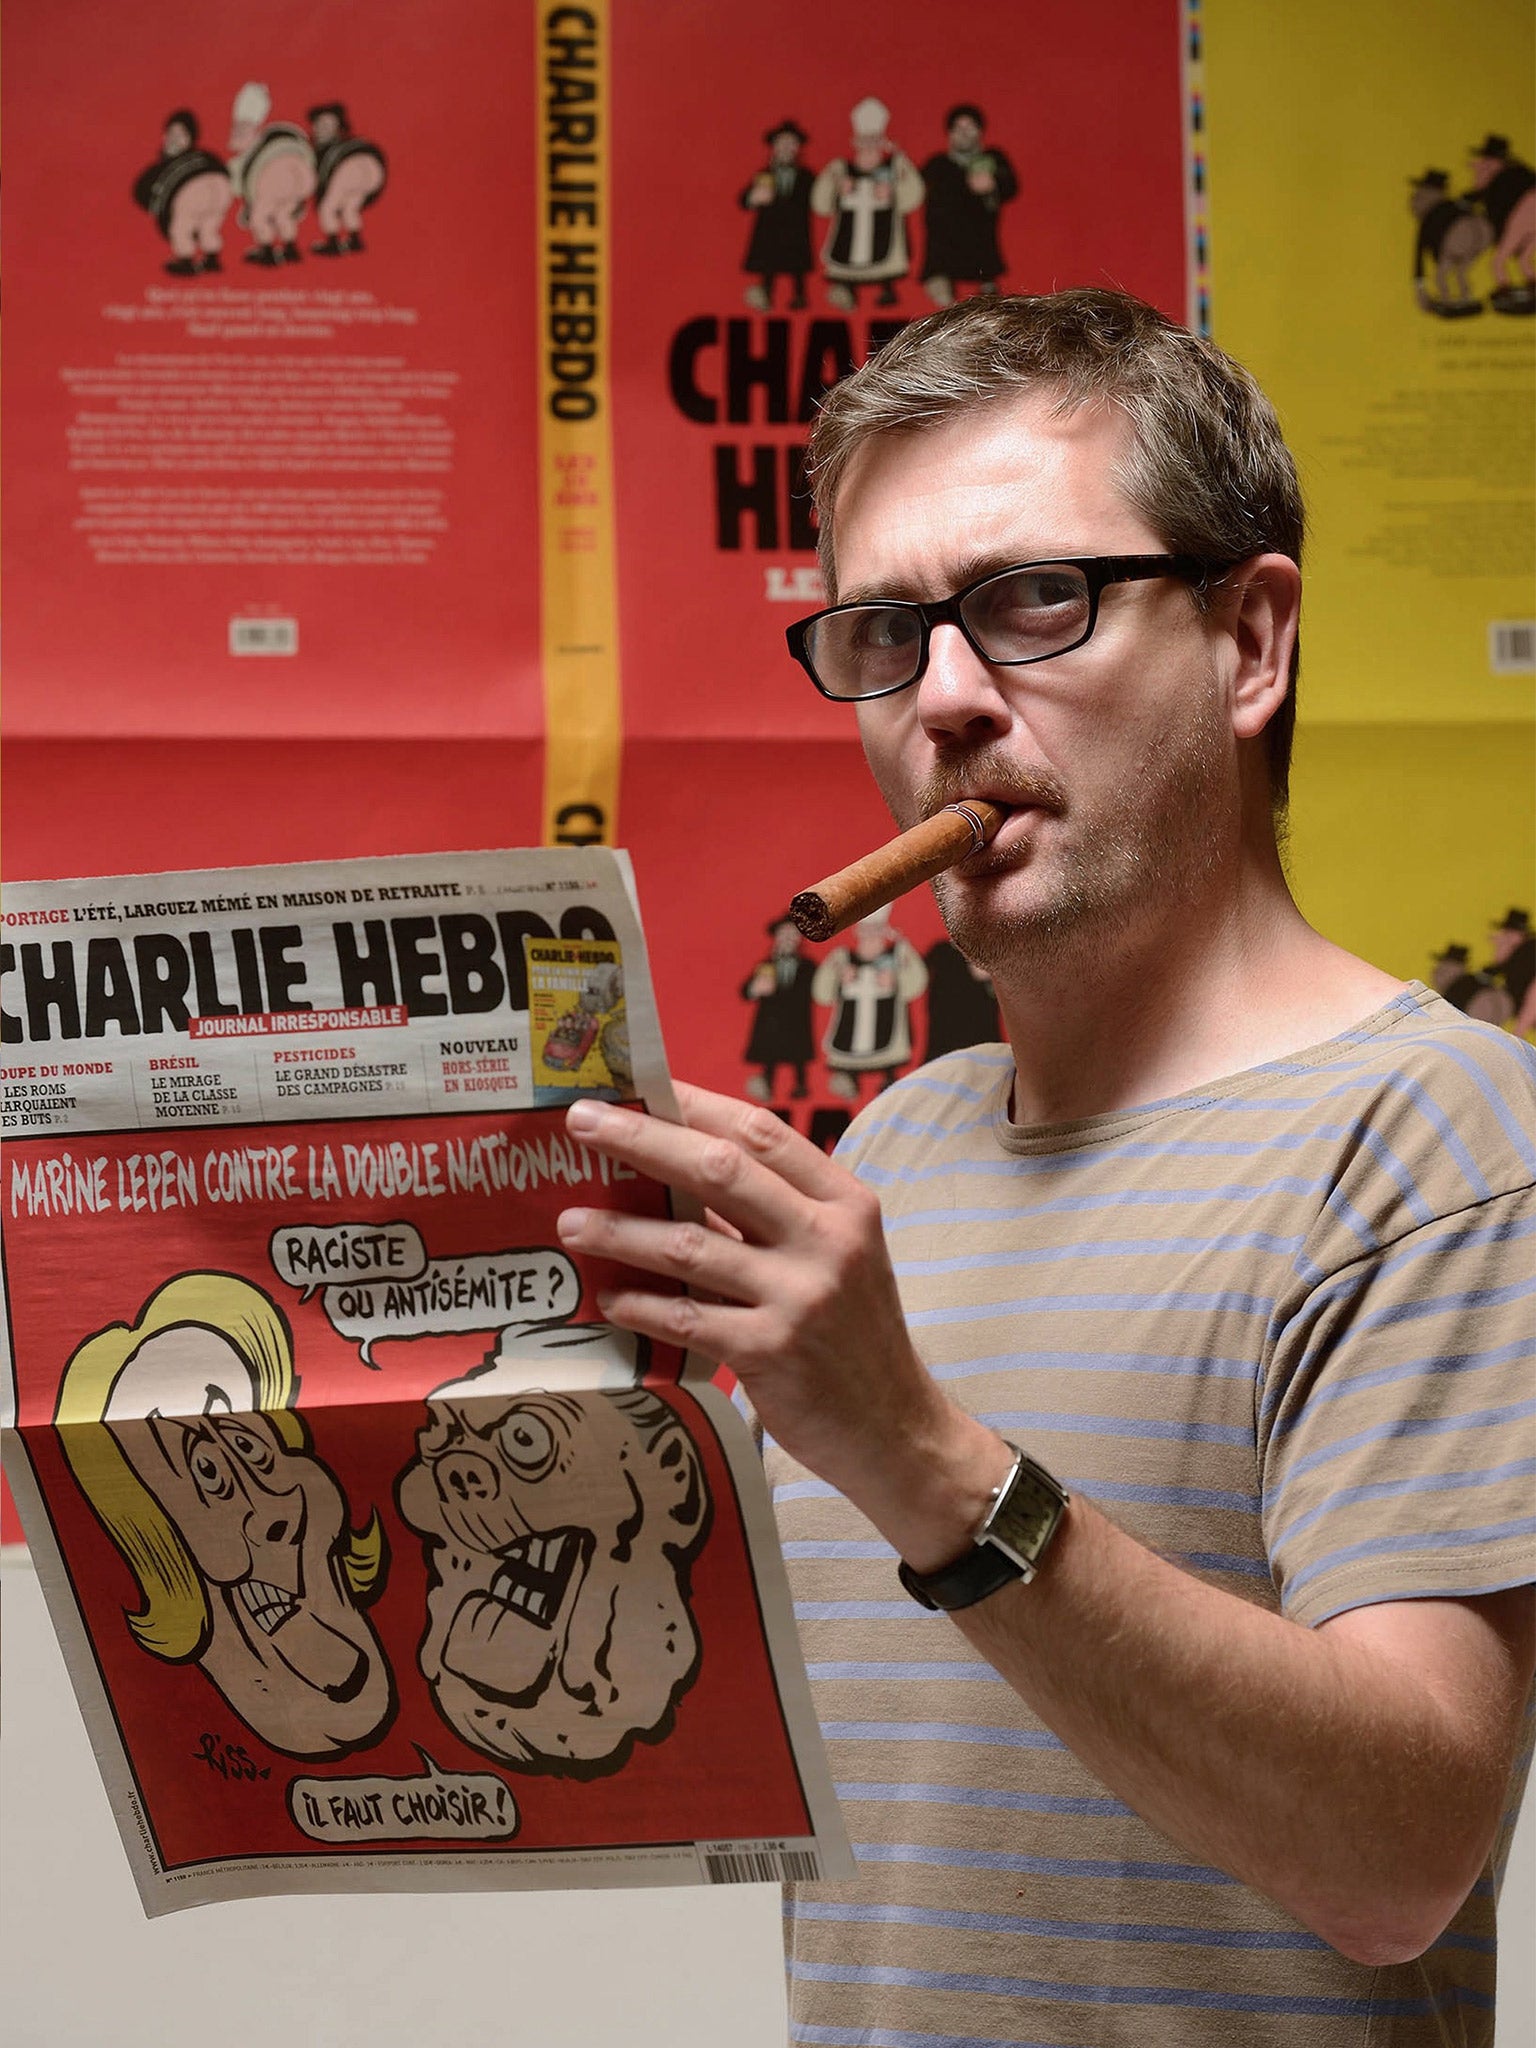 Editor Stéphane Charbonnier had previously received death threats (AFP)